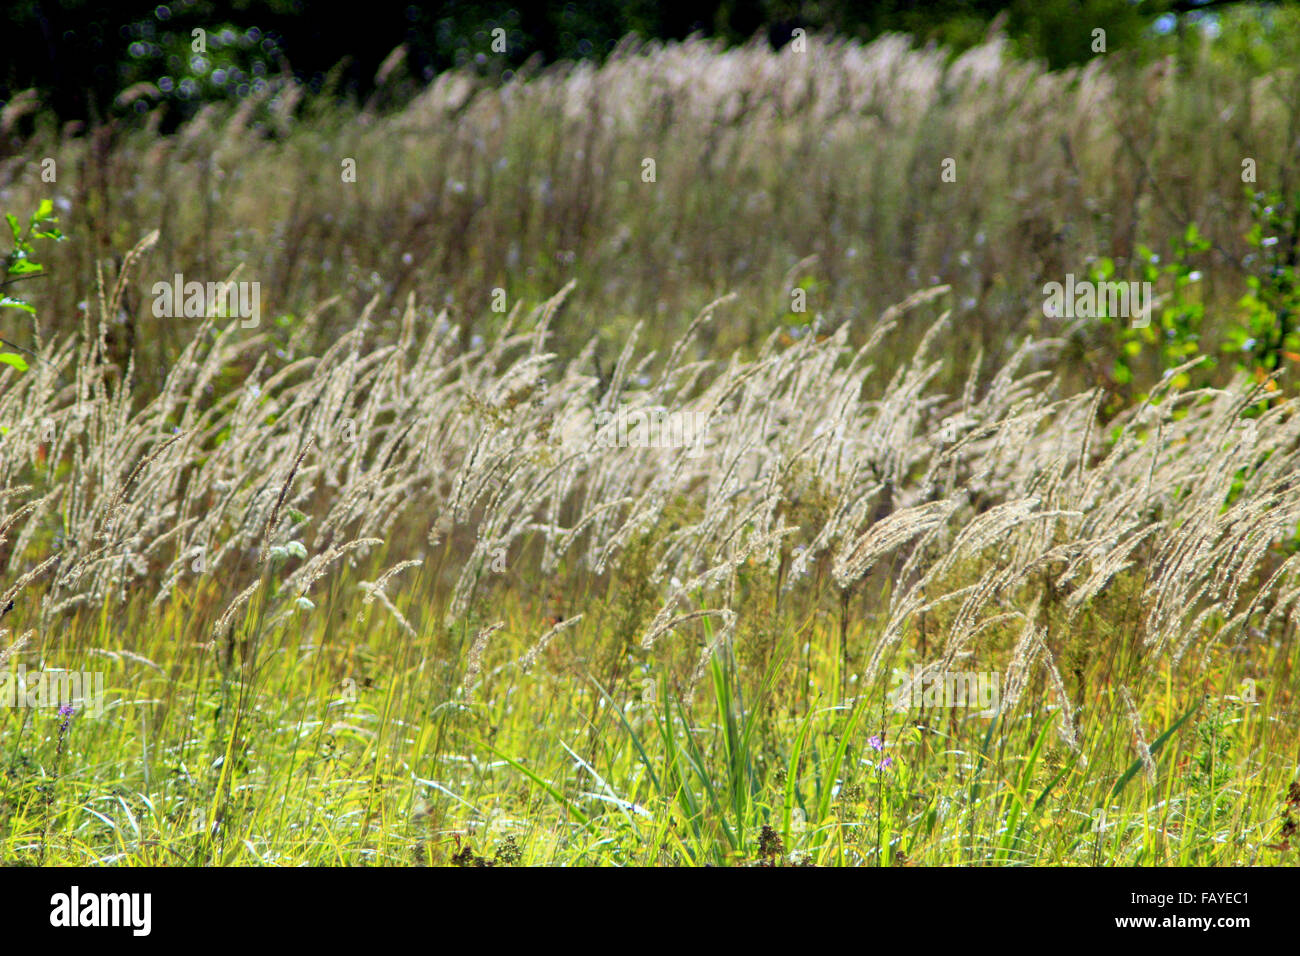 thicket of high green grass in the field Stock Photo